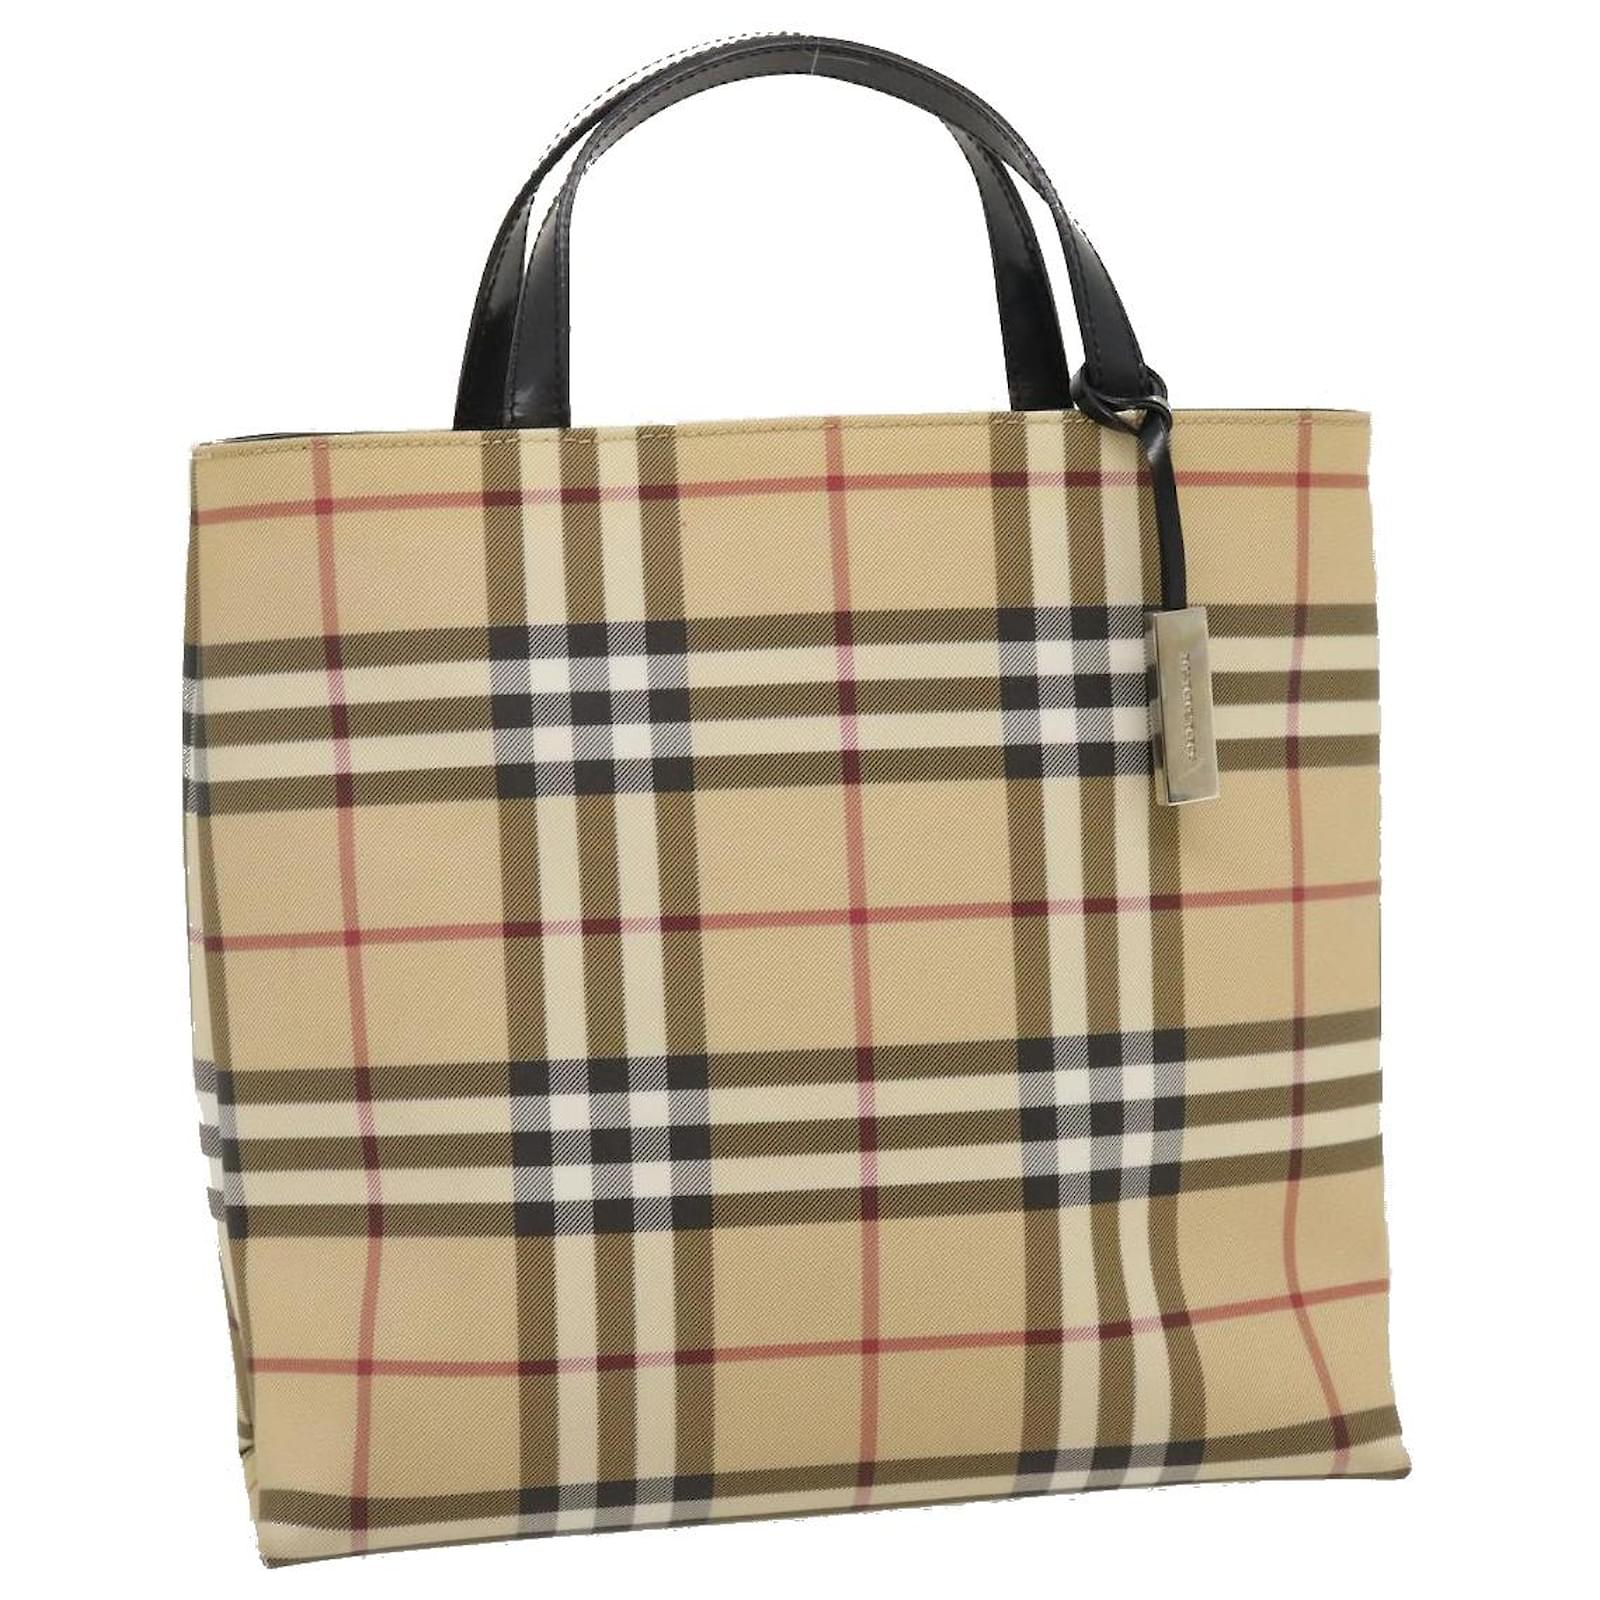 Does all Burberry handbag have serial number?